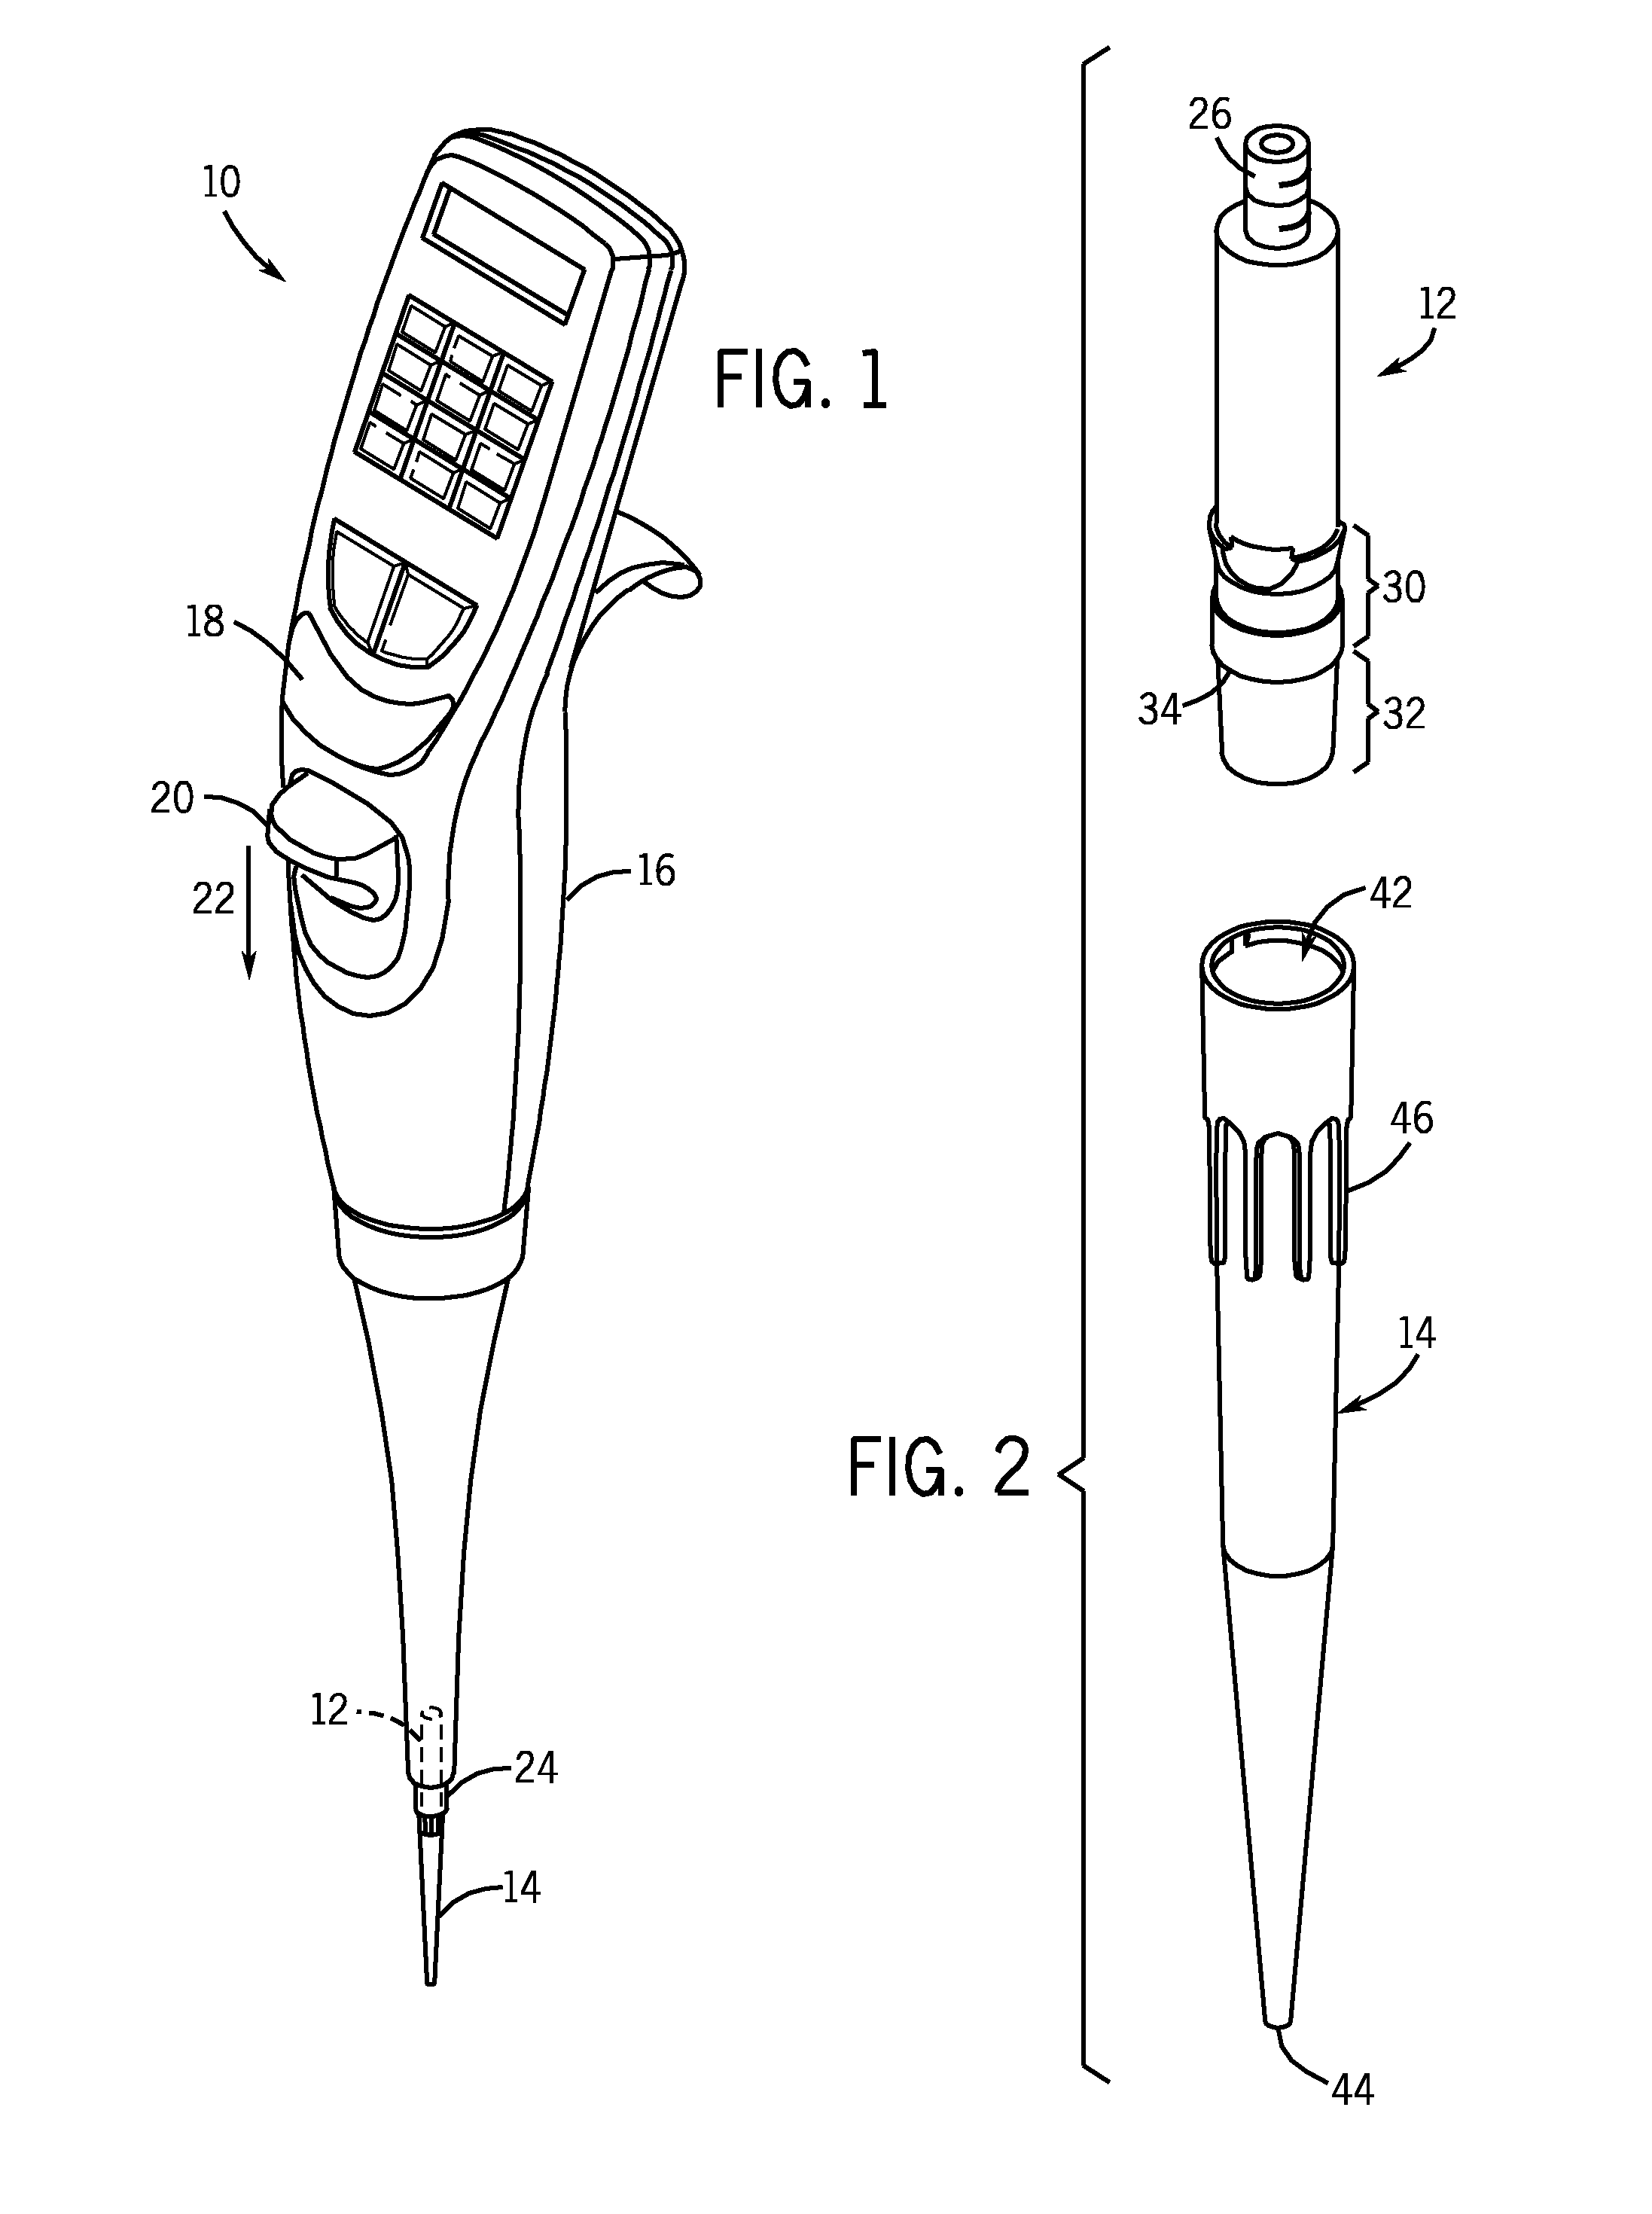 Locking pipette tip and mounting shaft